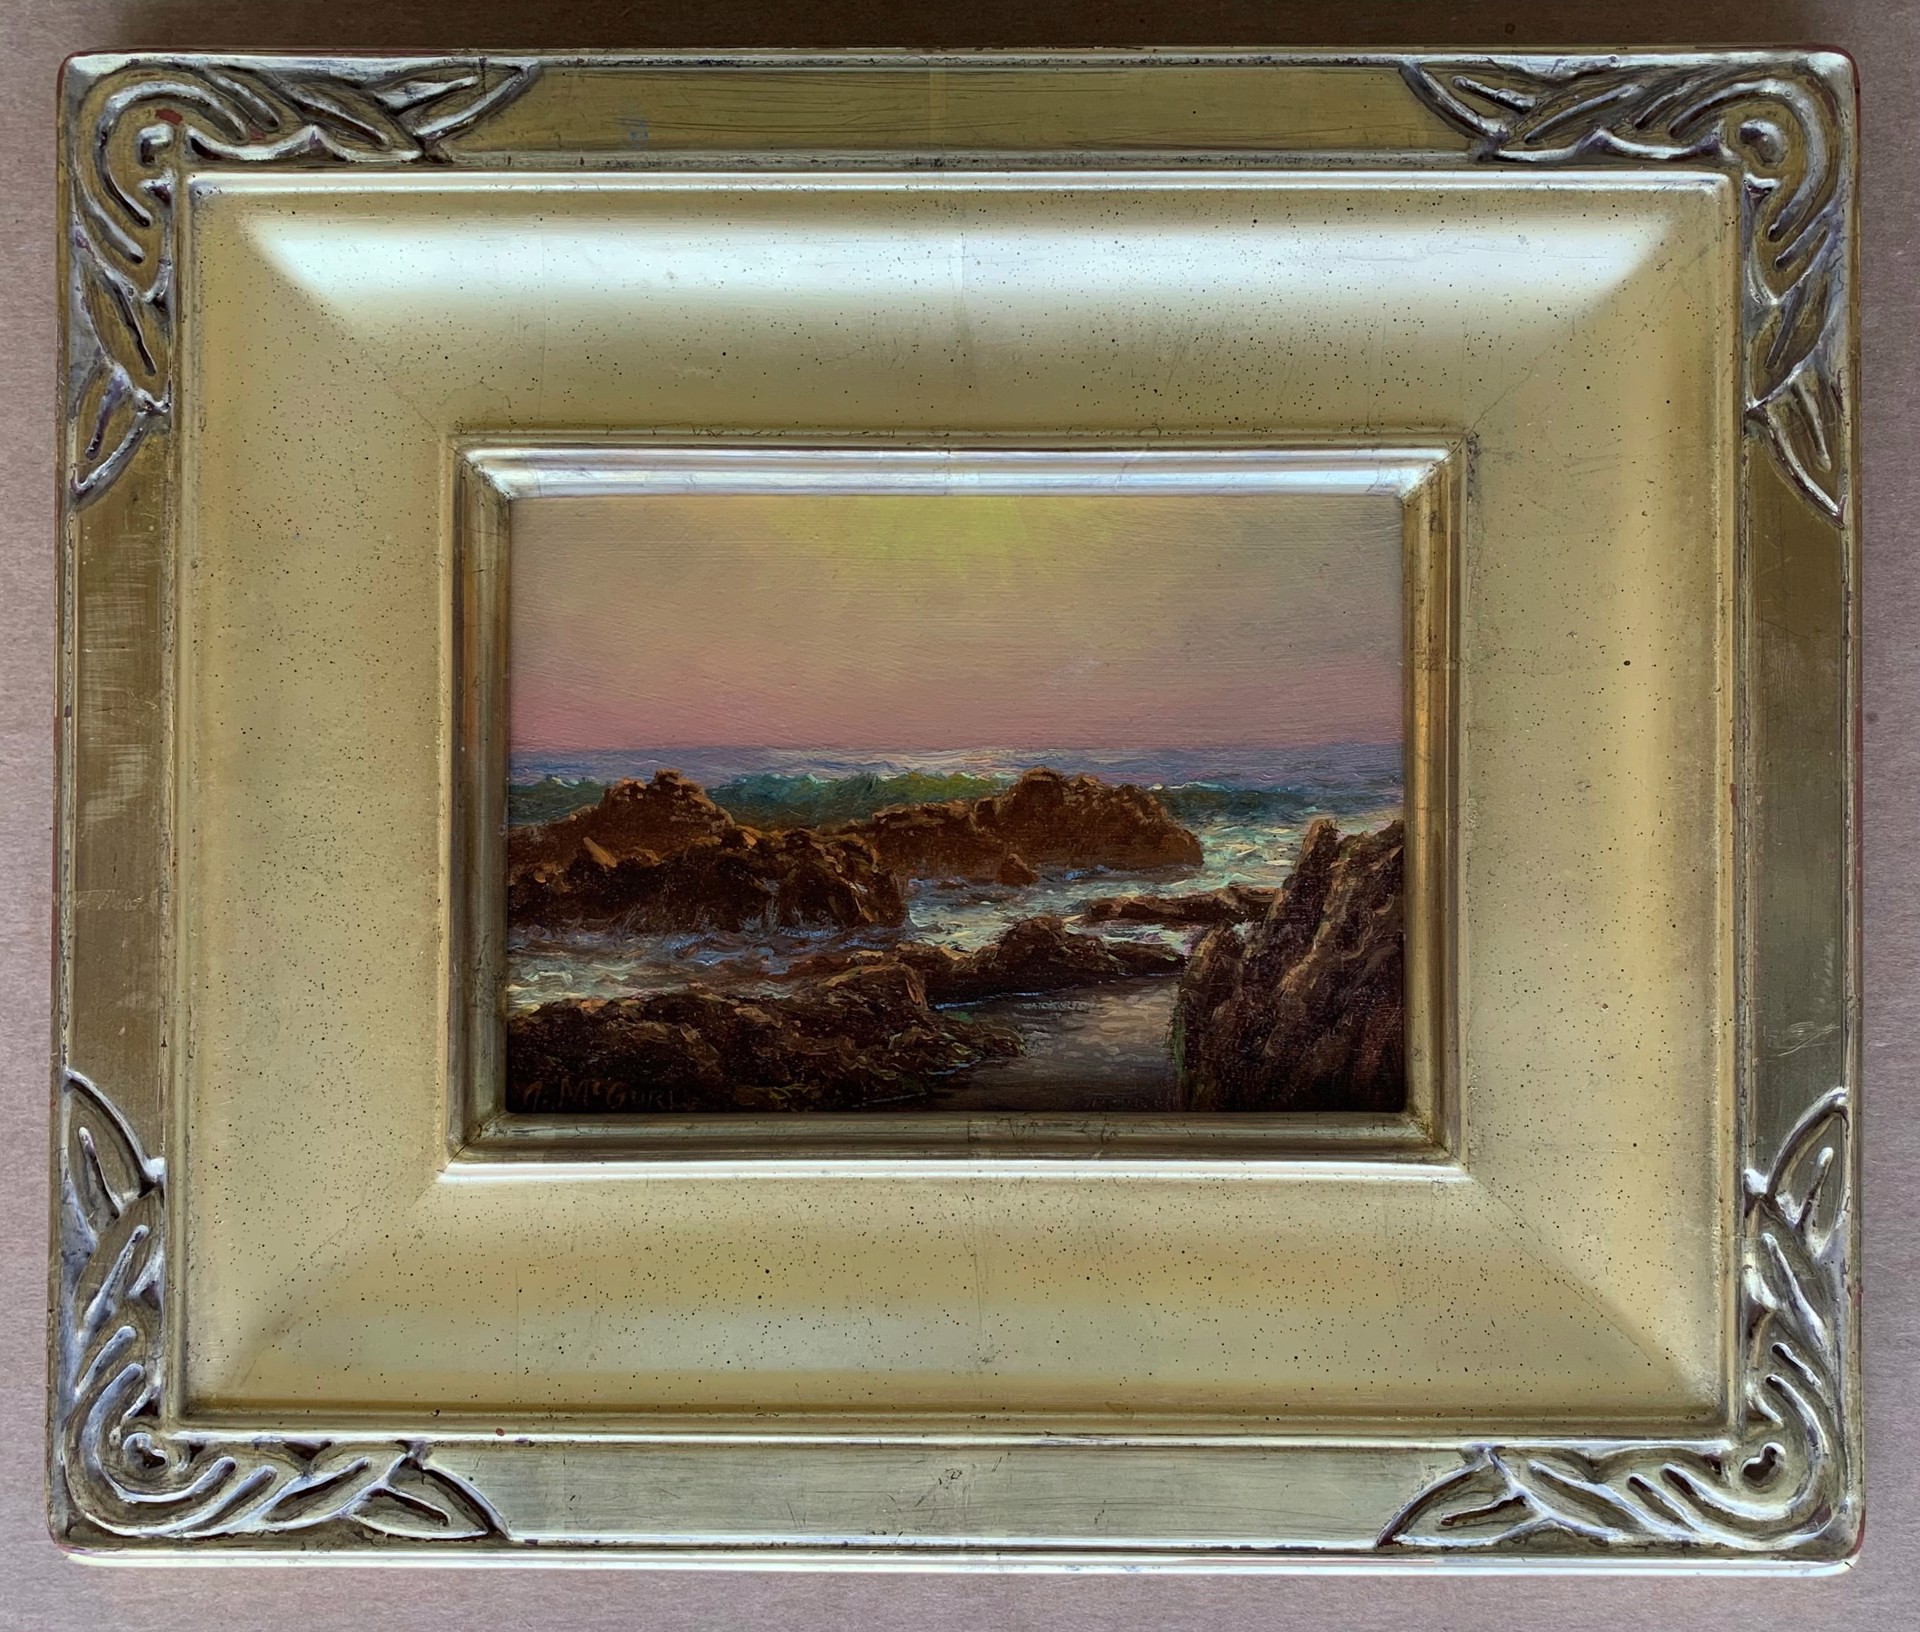 Ocean Waves at Sunset by Joseph McGurl